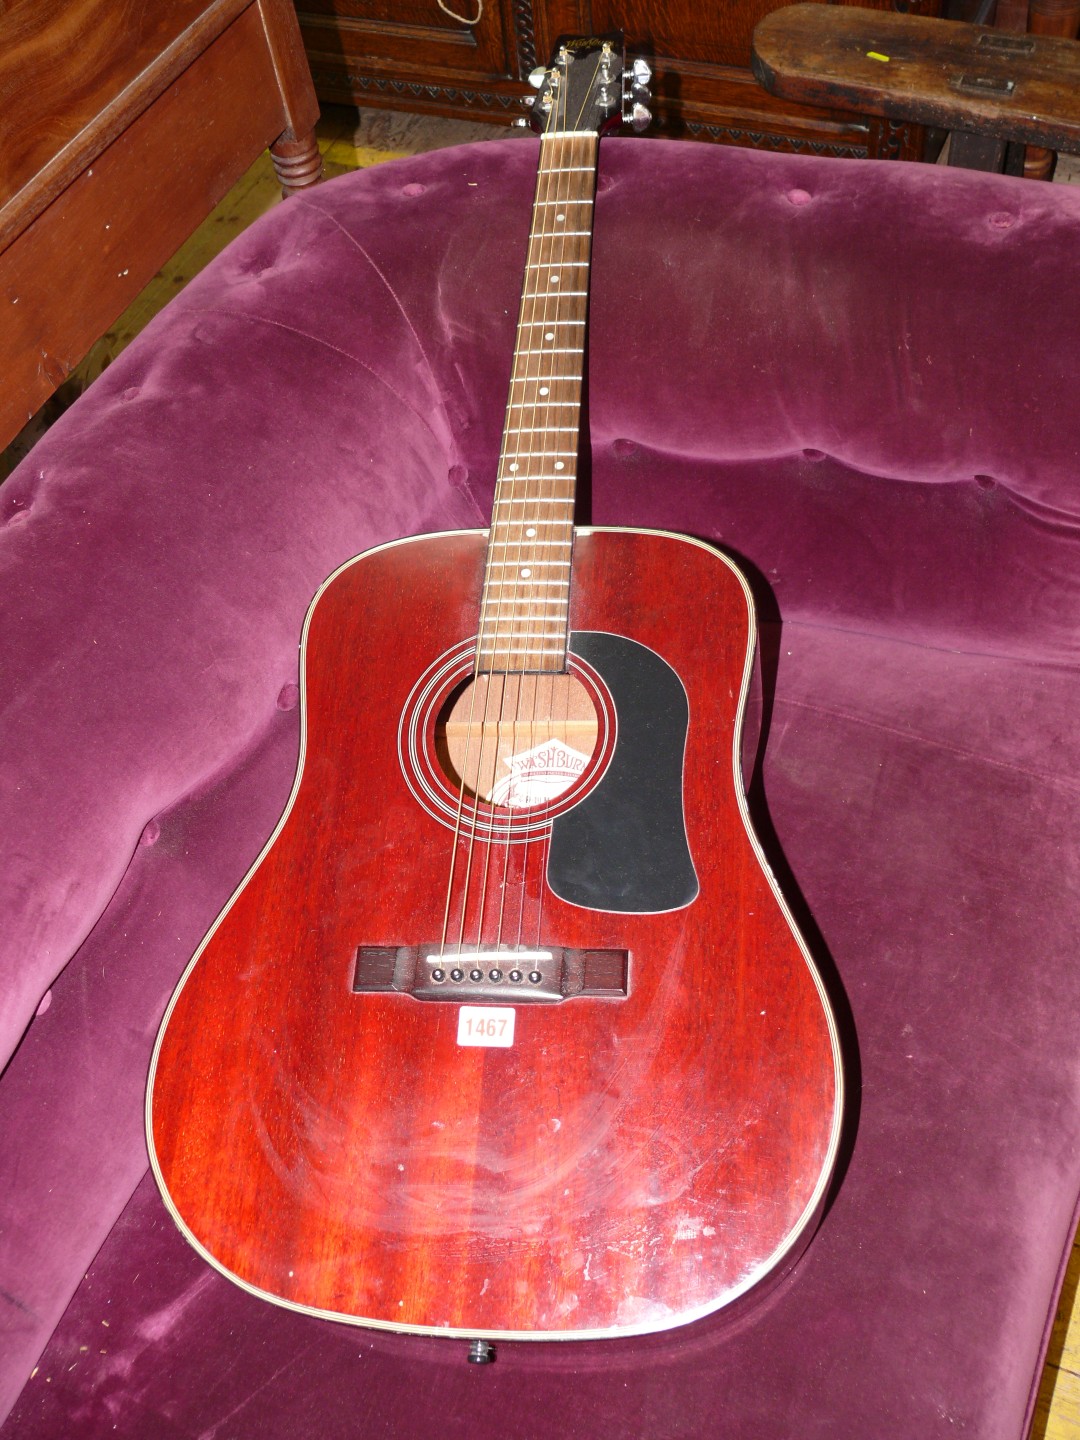 A Washburn acoustic guitar, model no. D-10 M/TWR and numbered 98103591, labelled to the interior.